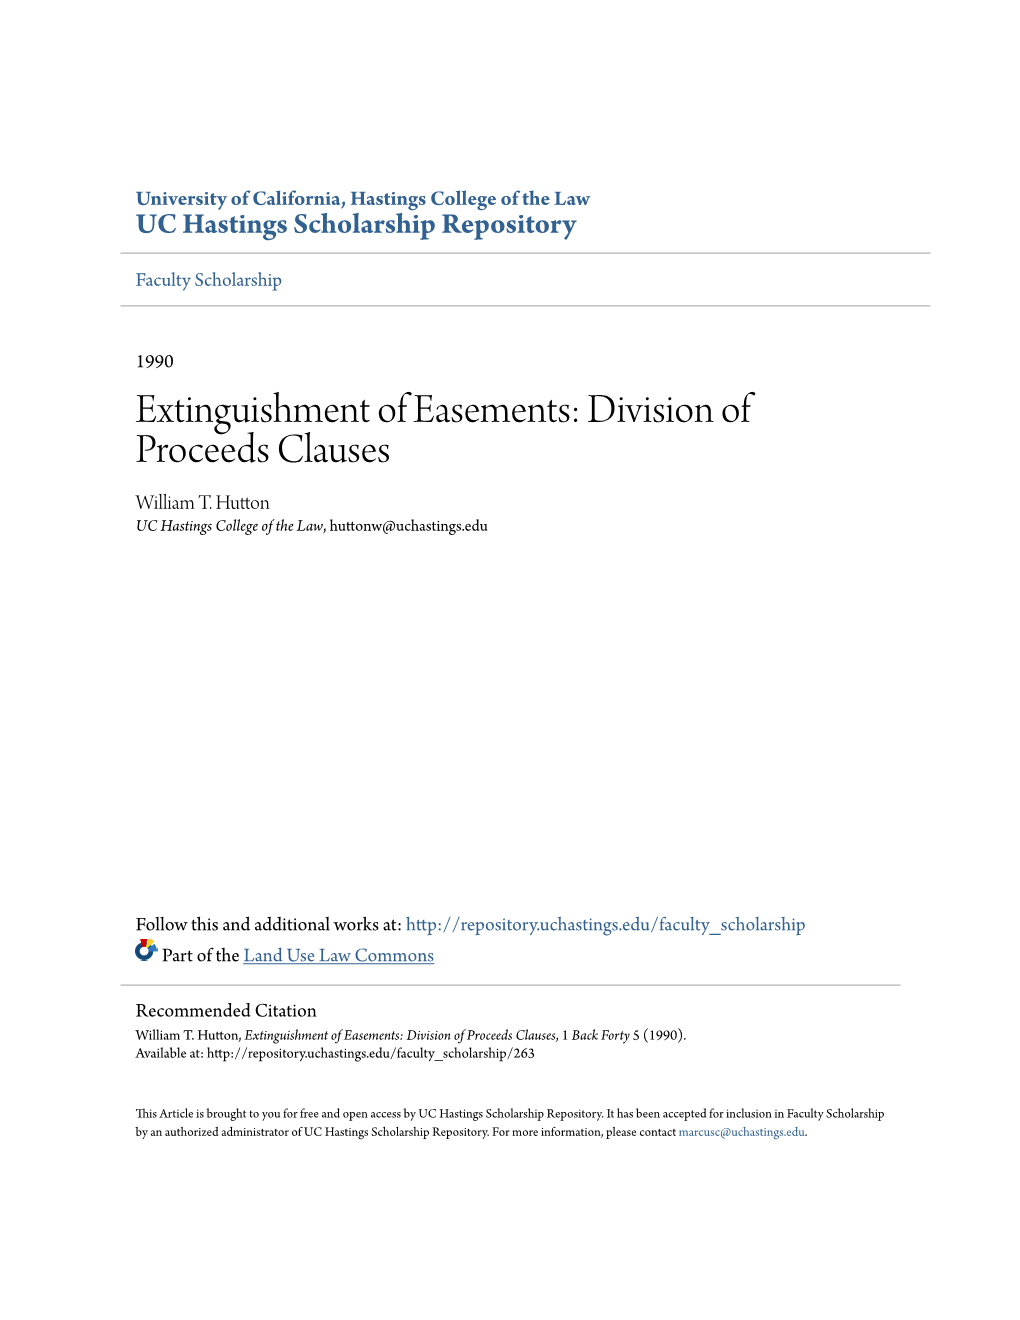 Extinguishment of Easements: Division of Proceeds Clauses William T